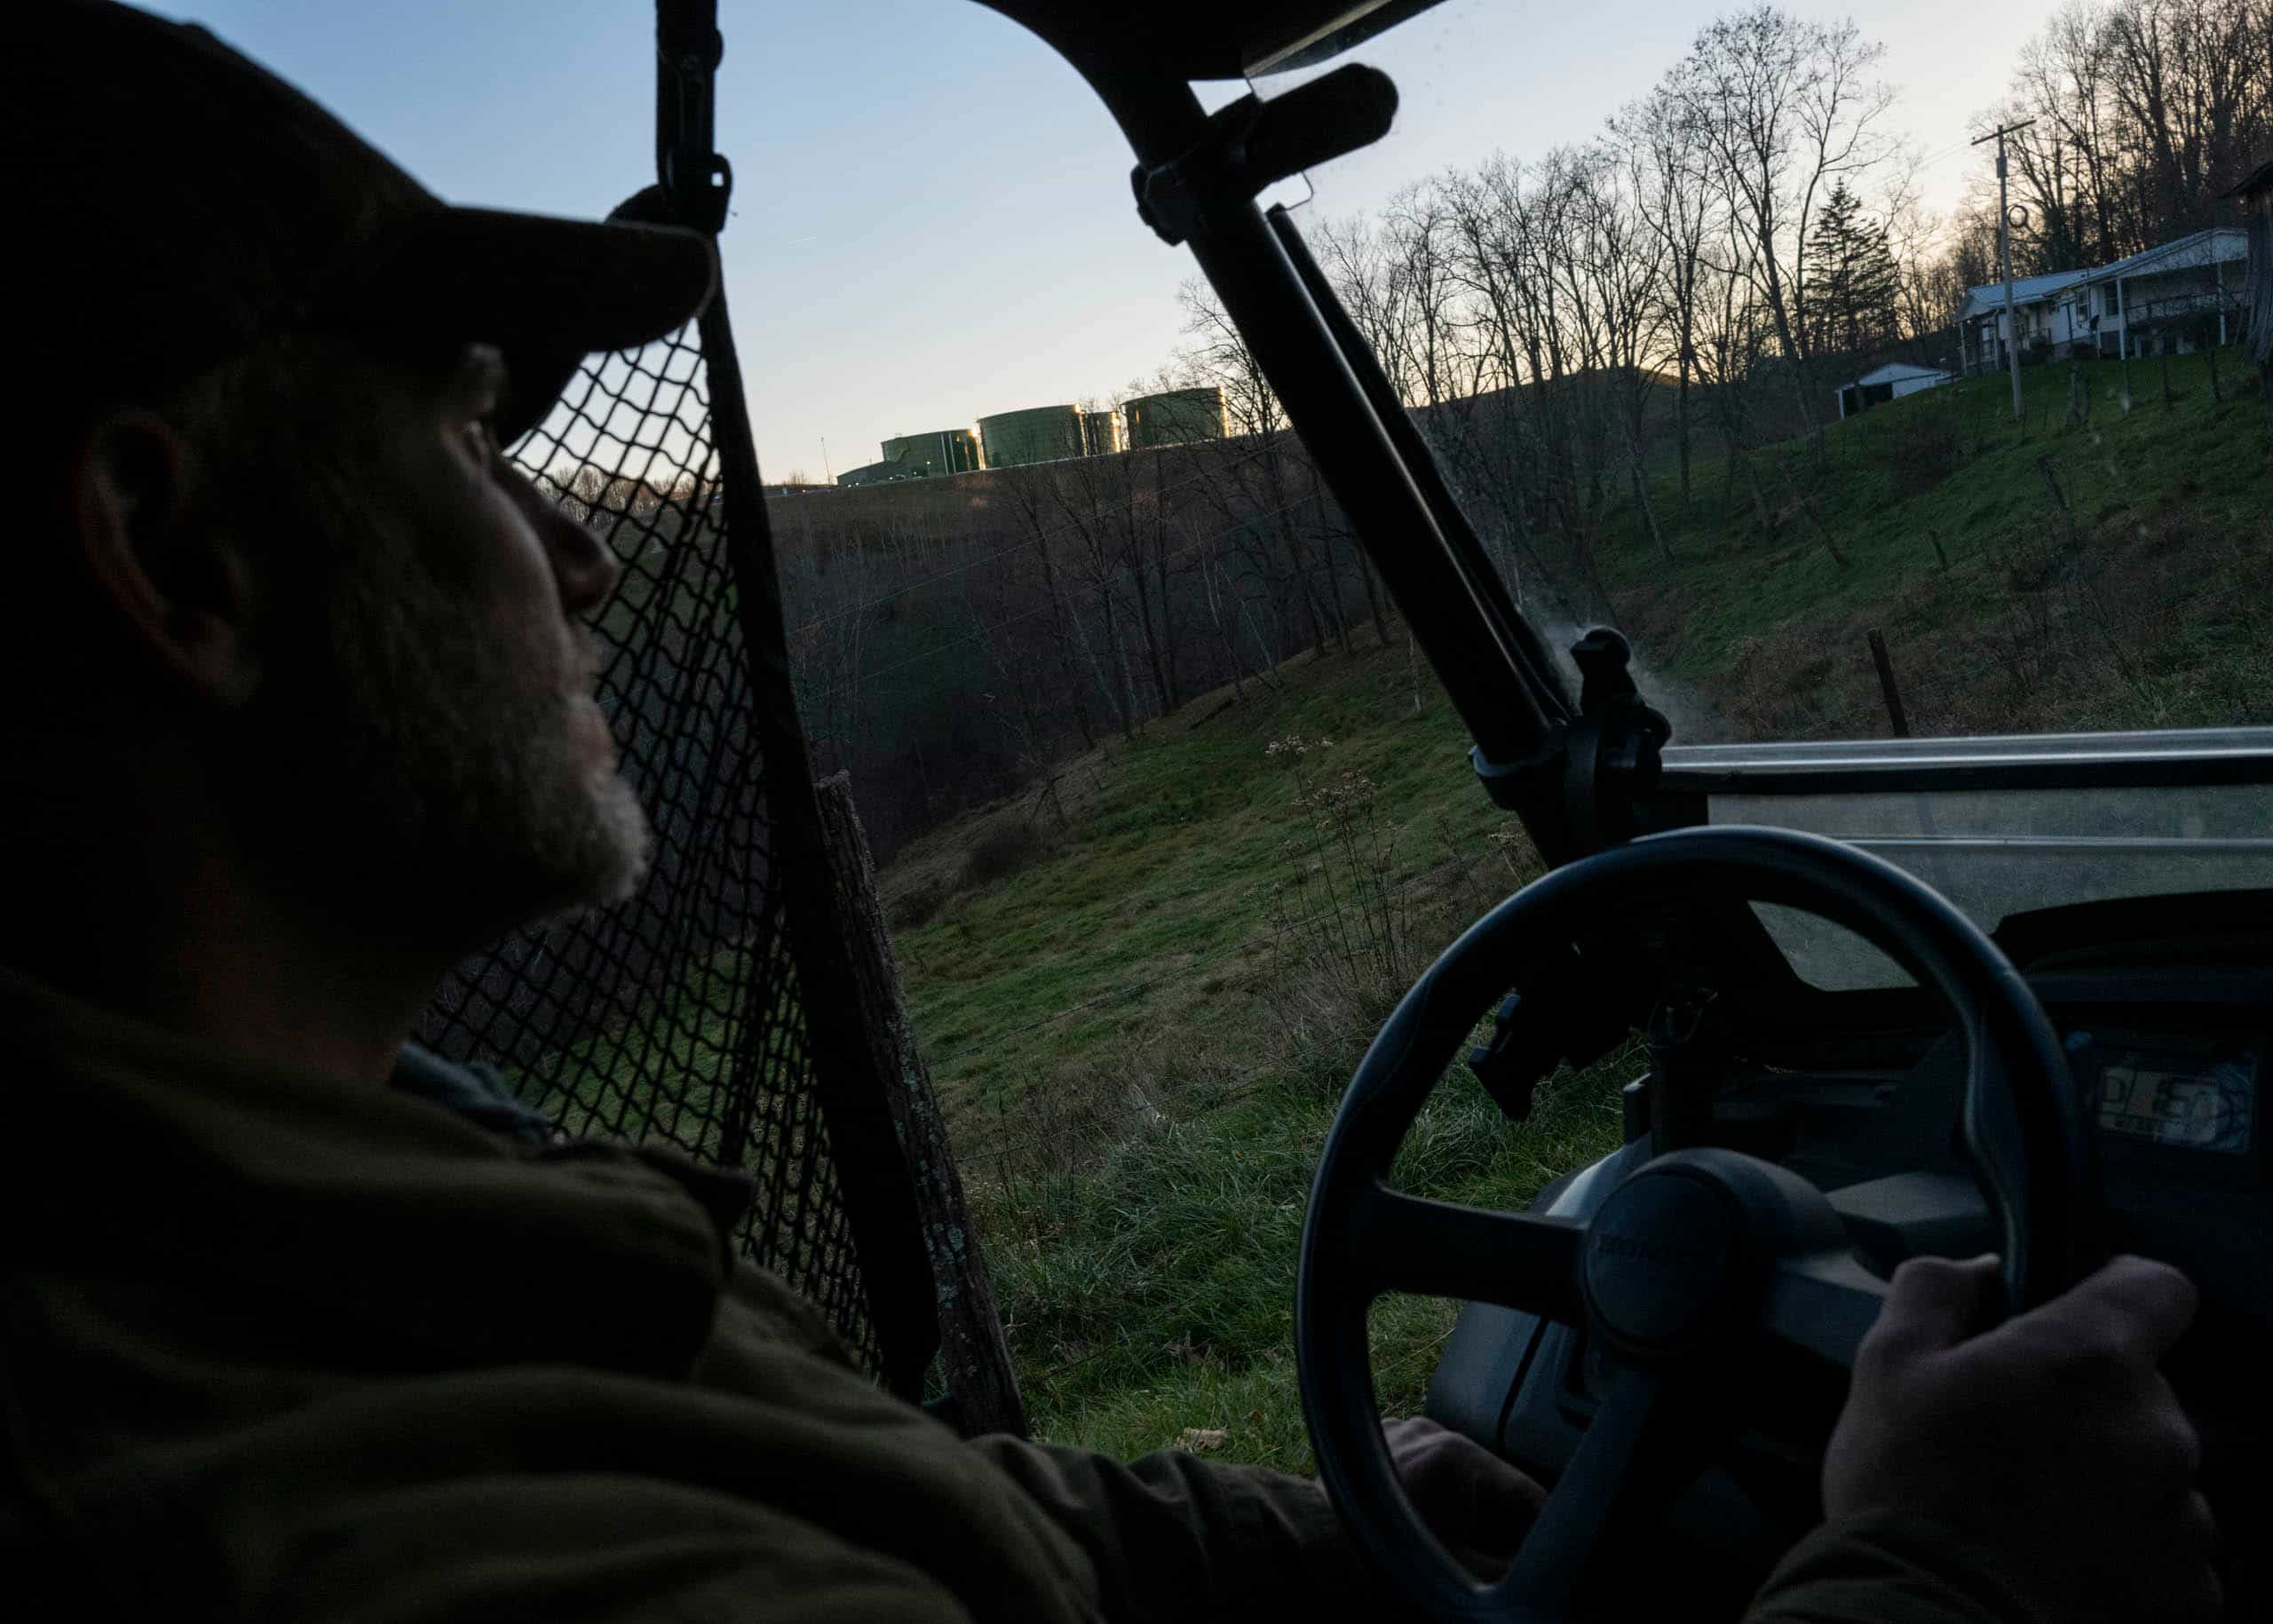 A man drives an ATV up a hill towards four large wastewater tanks.